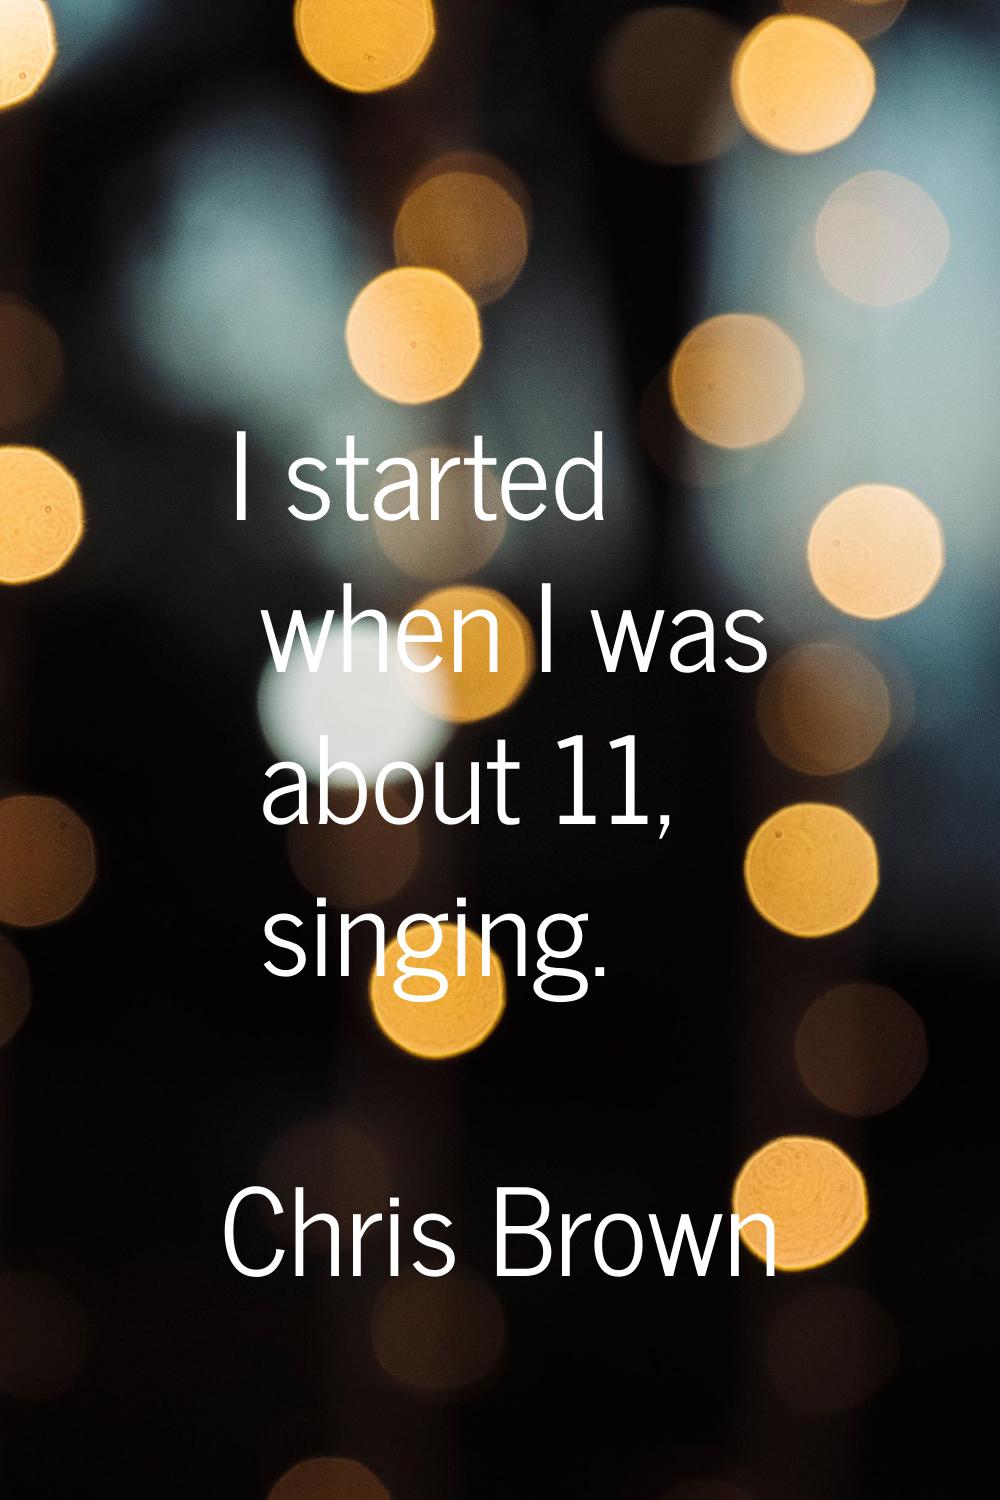 I started when I was about 11, singing.